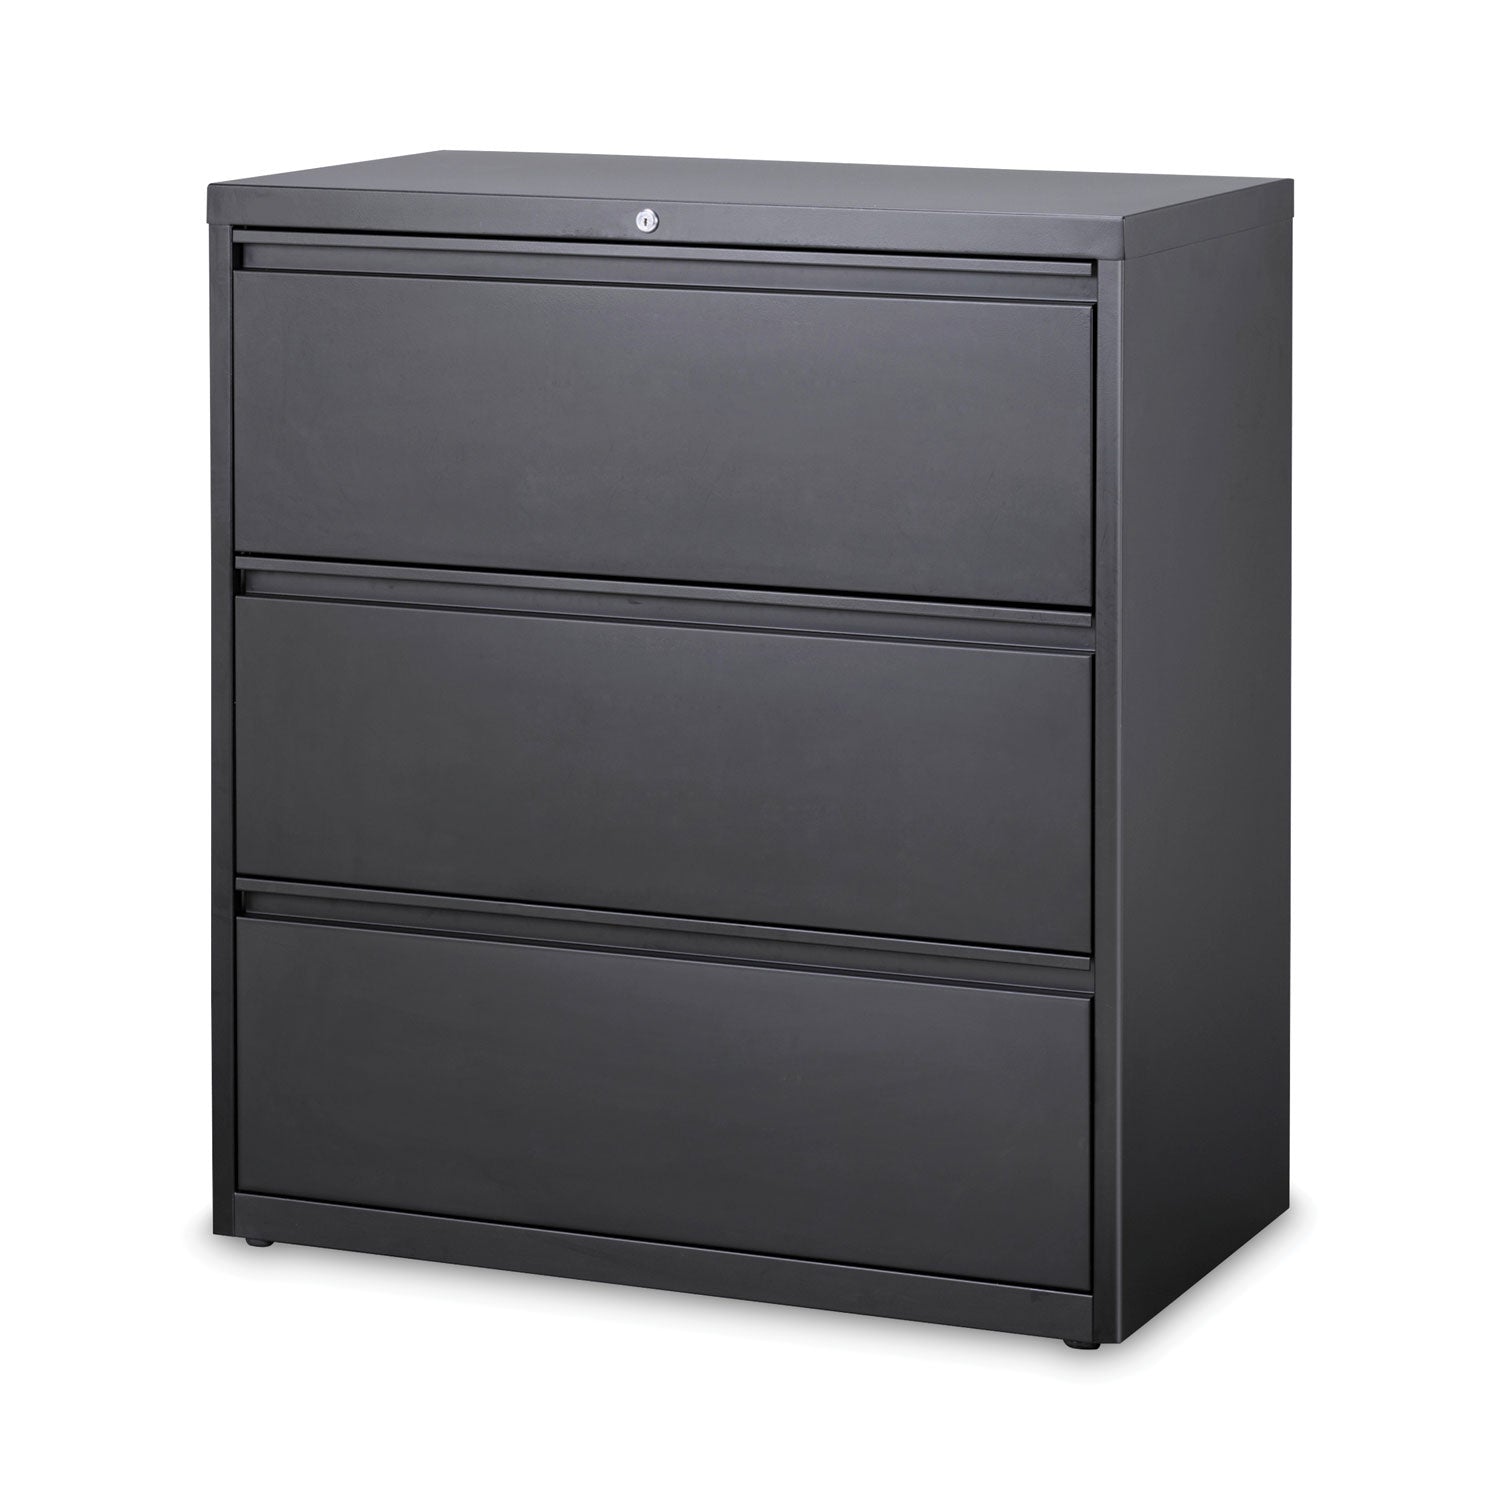 lateral-file-cabinet-3-letter-legal-a4-size-file-drawers-charcoal-36-x-1862-x-4025_hid16066 - 1